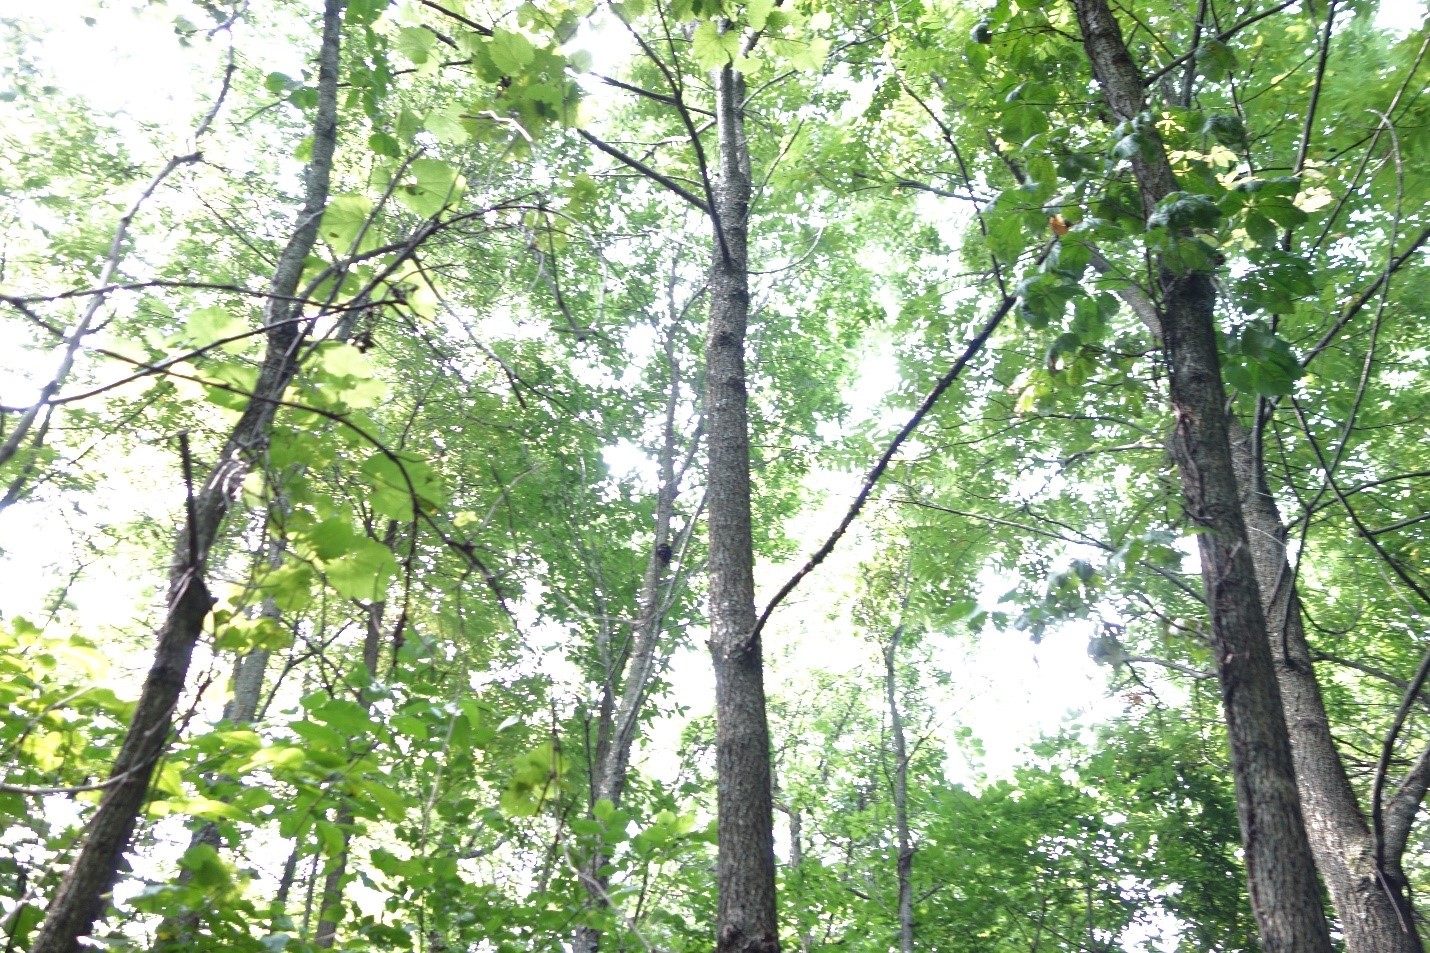 A portion of the stand with good oak regeneration in summer 2021 